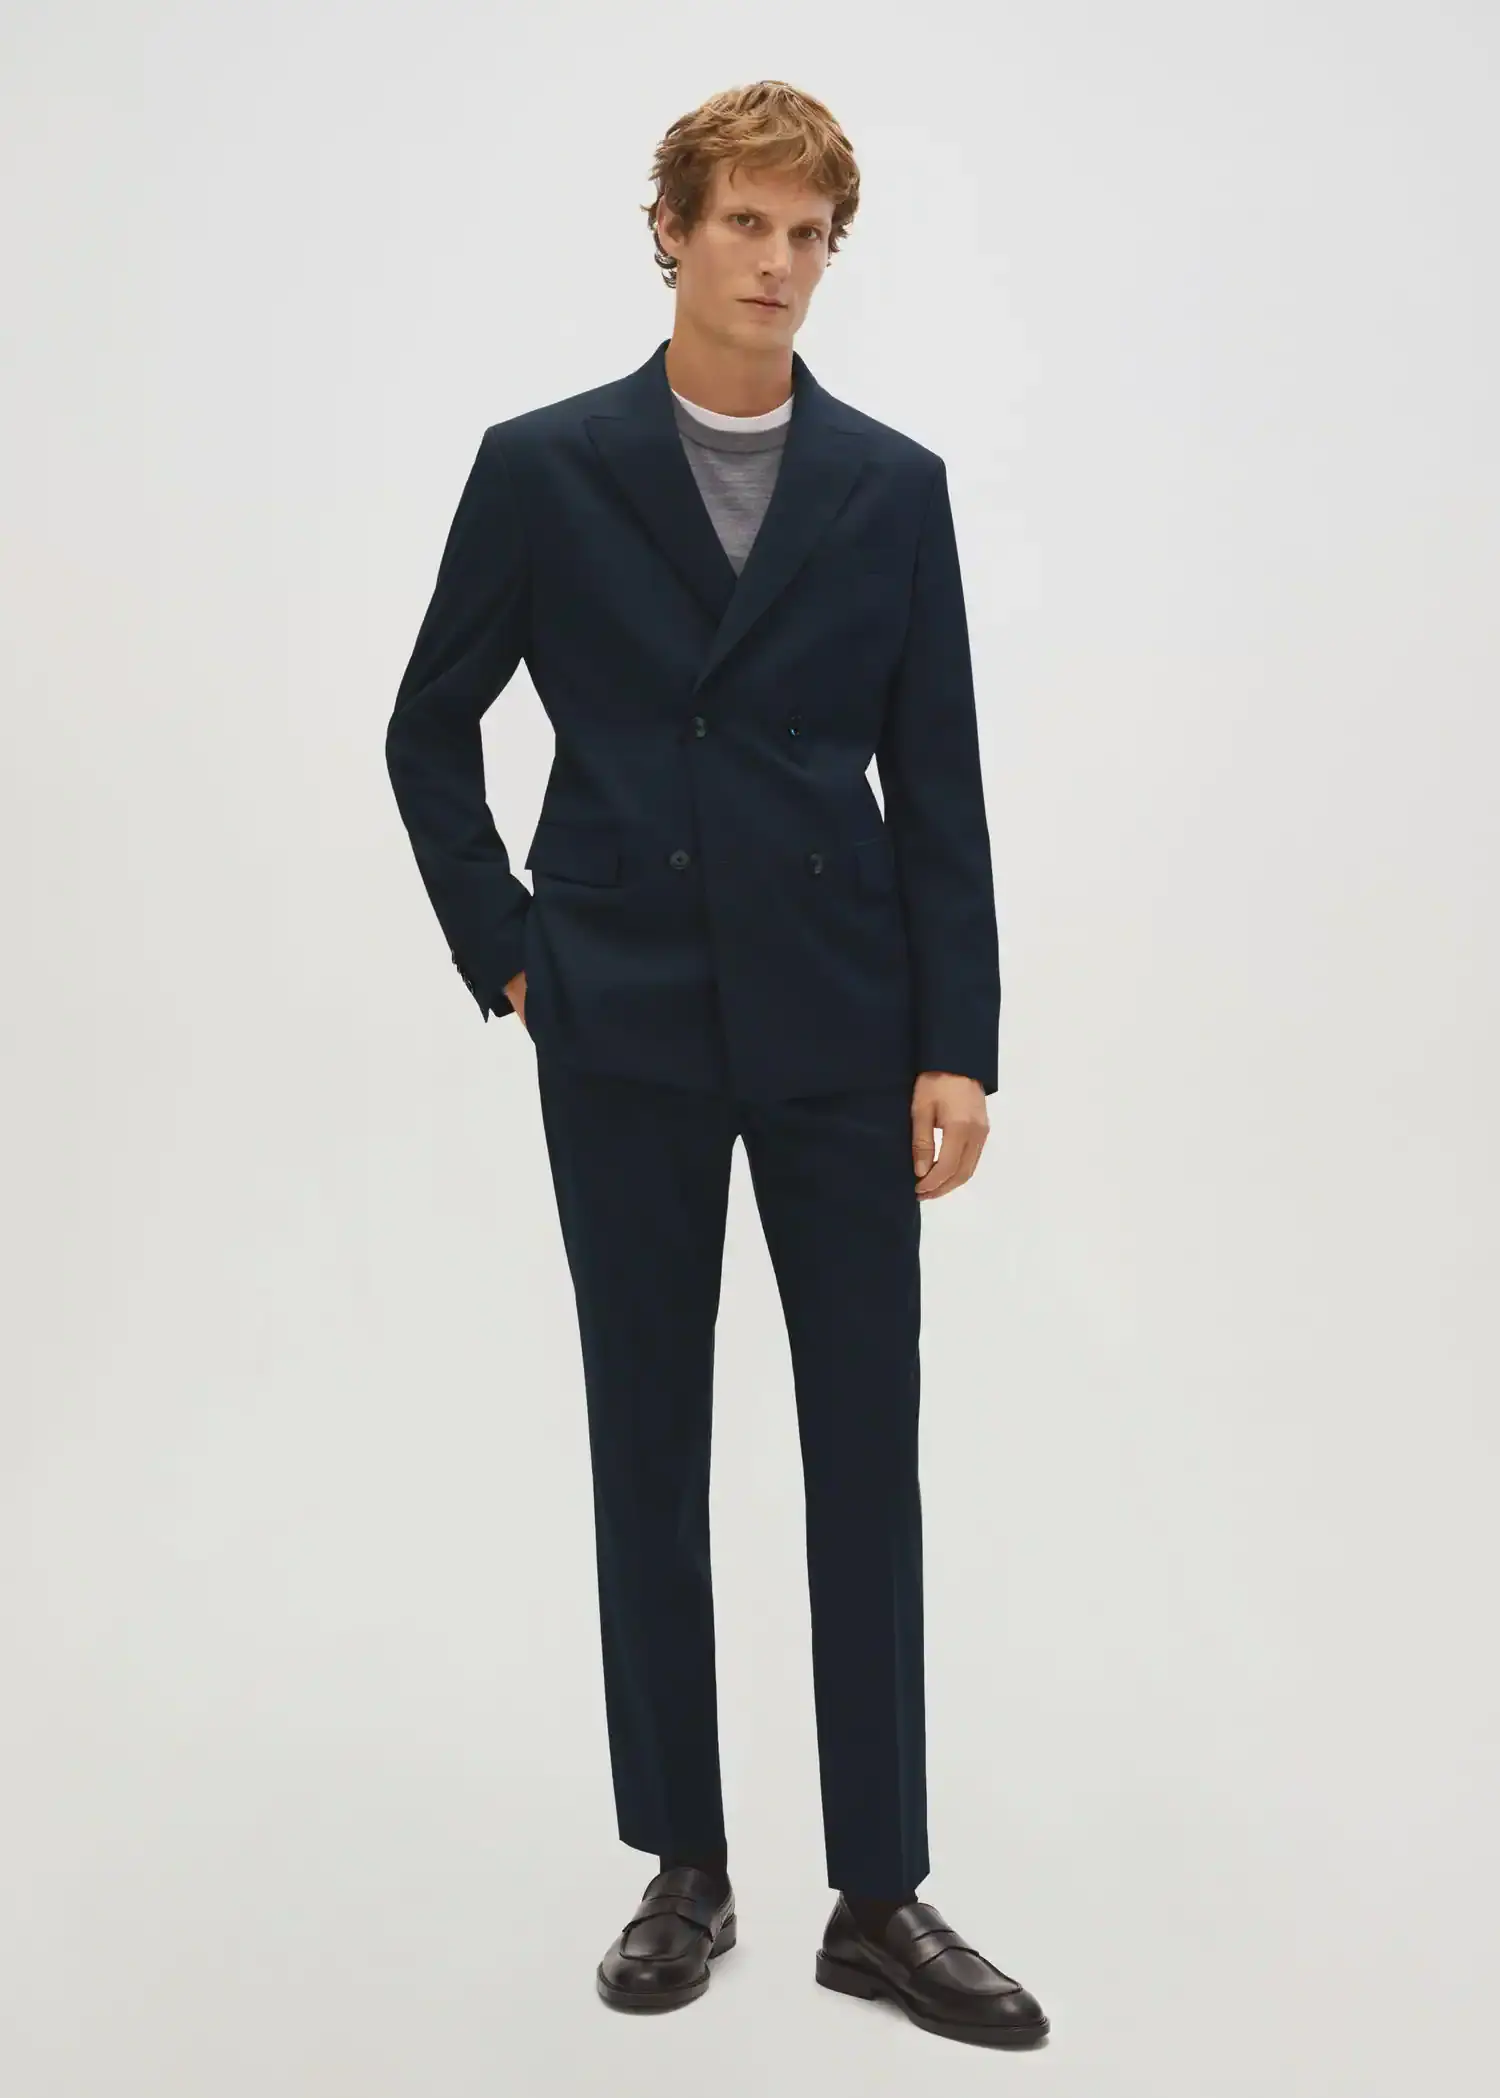 Mango Slim fit double-breasted suit blazer. a man in a suit standing in front of a white wall. 